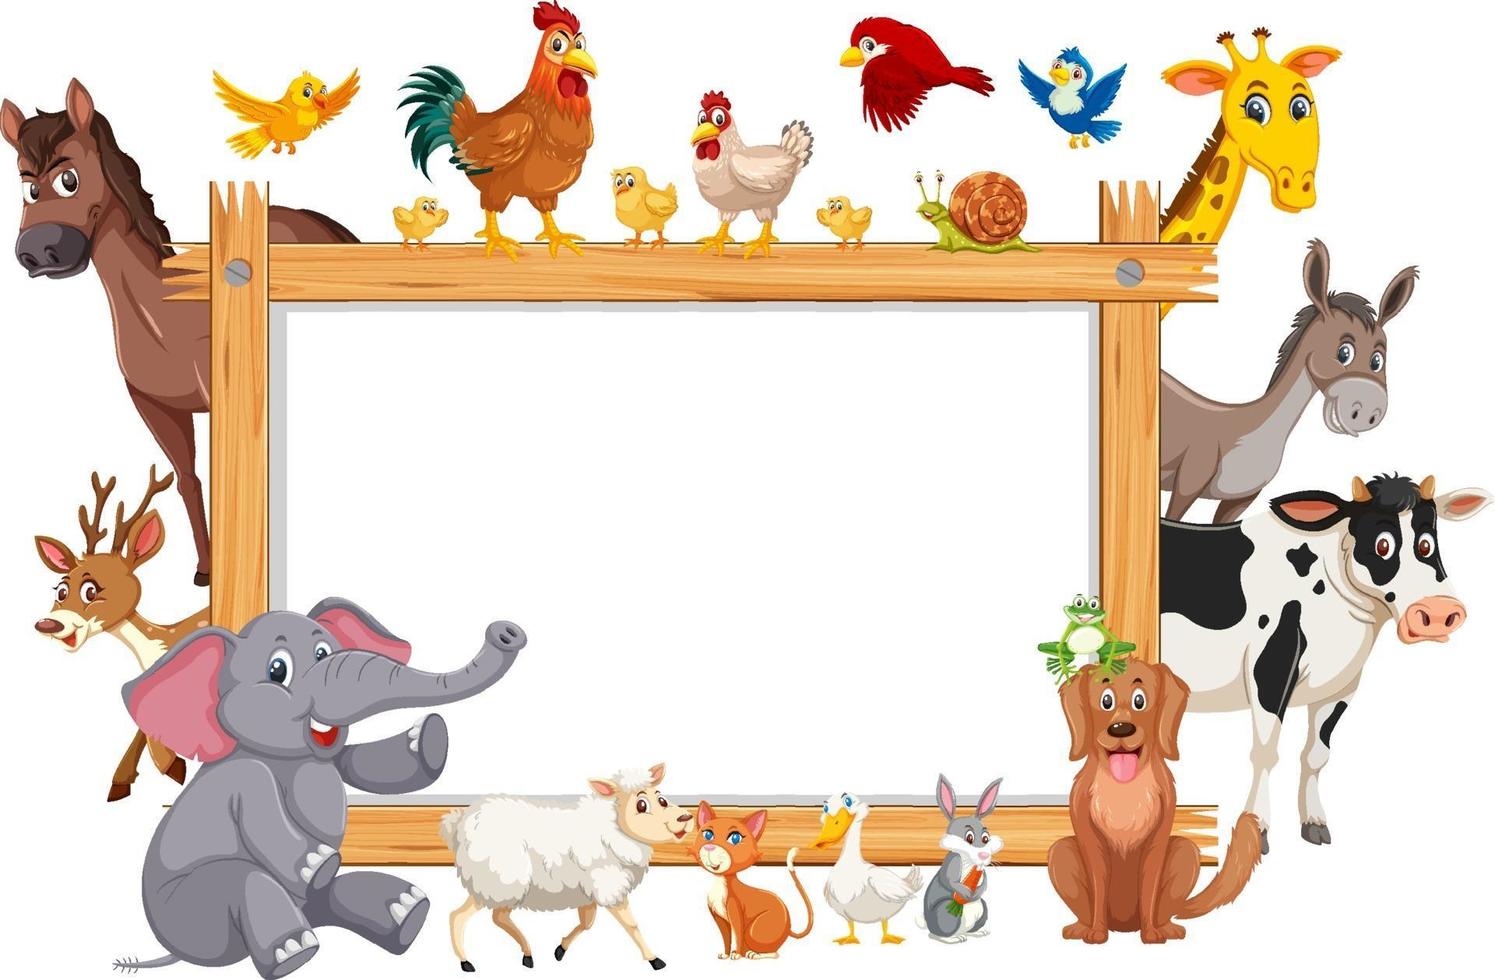 Empty wooden frame with various wild animals vector